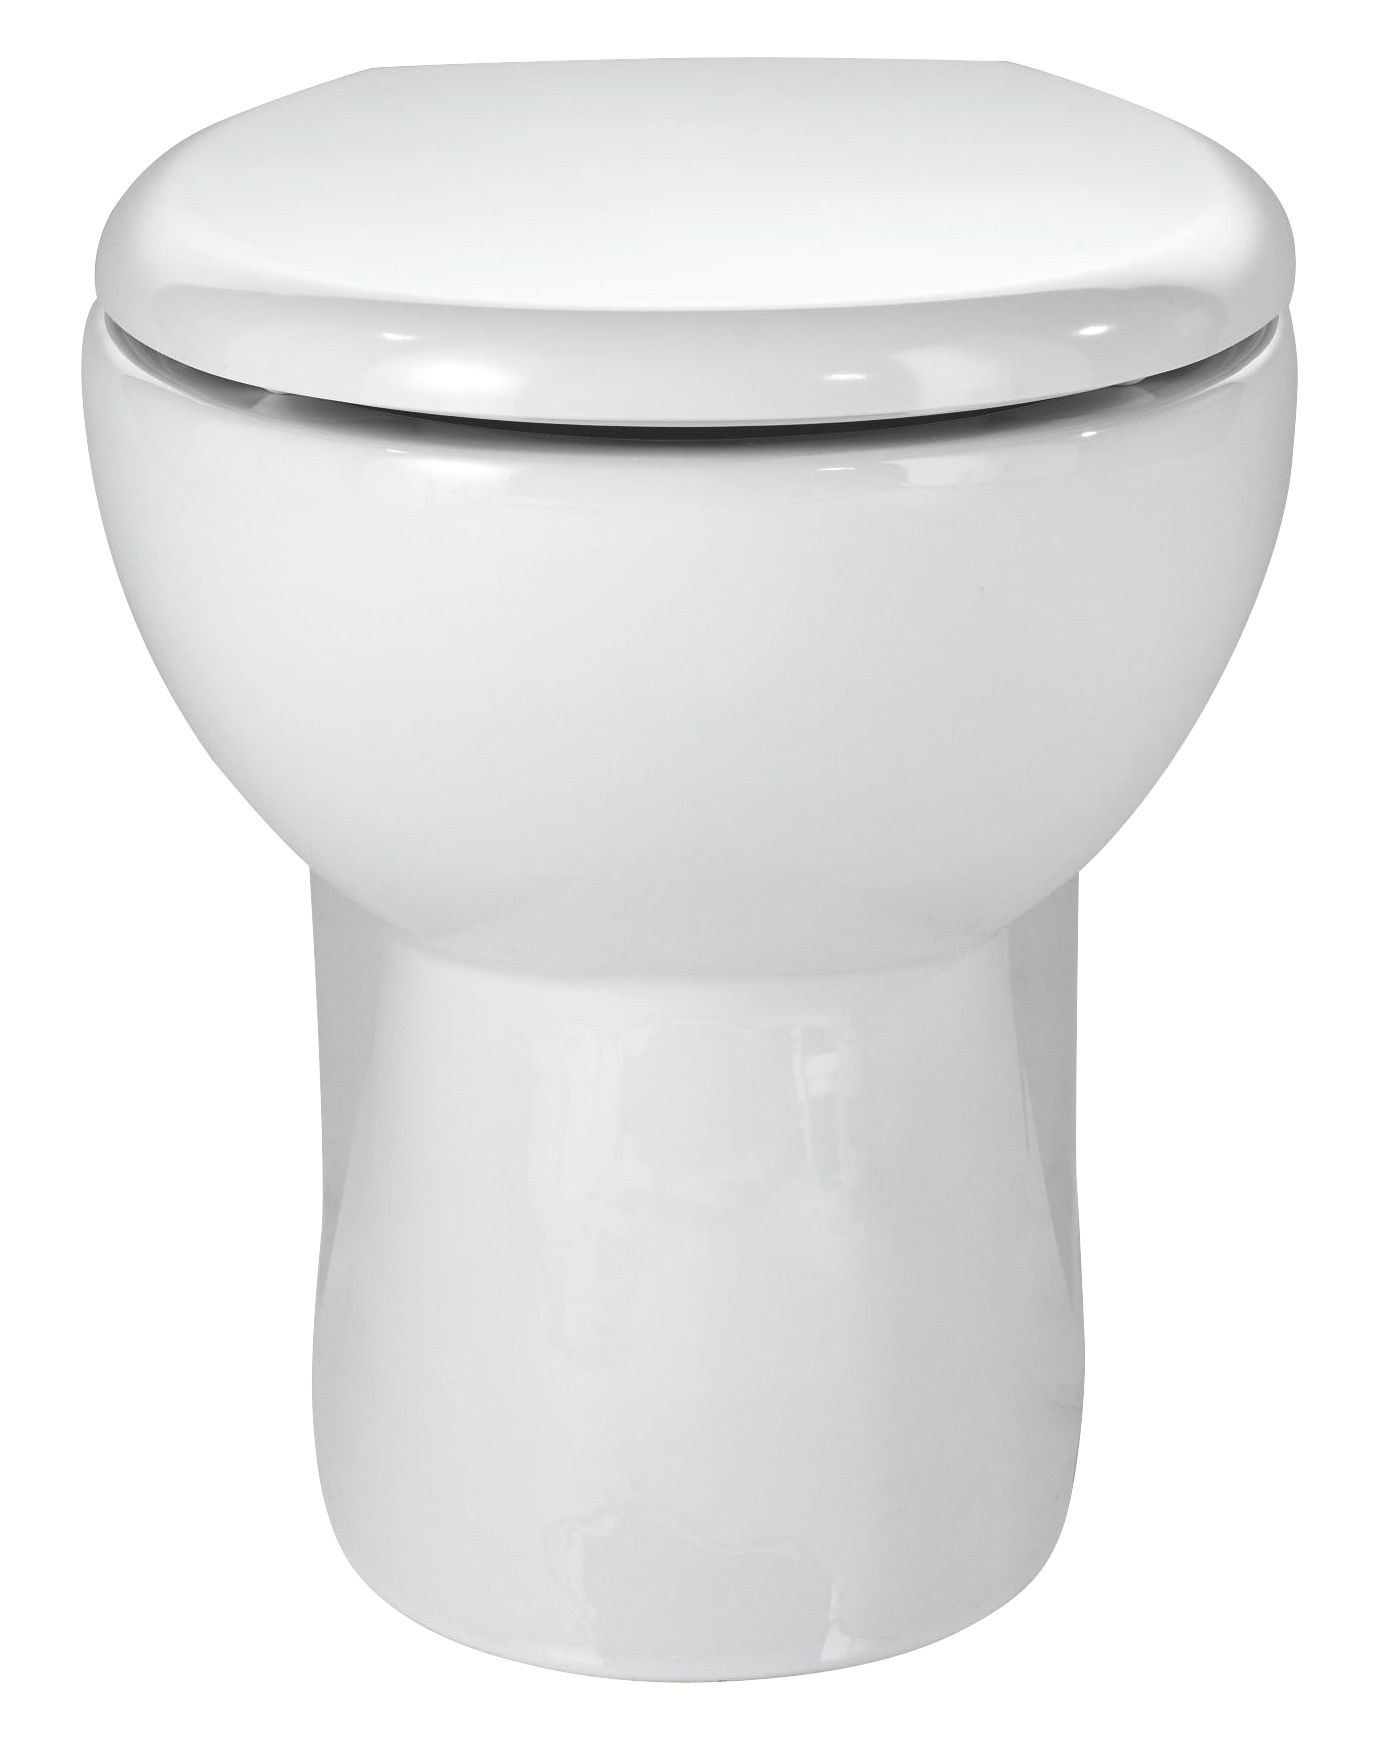 Cooke & Lewis Ardesio Gloss White Right-handed Vanity & toilet unit